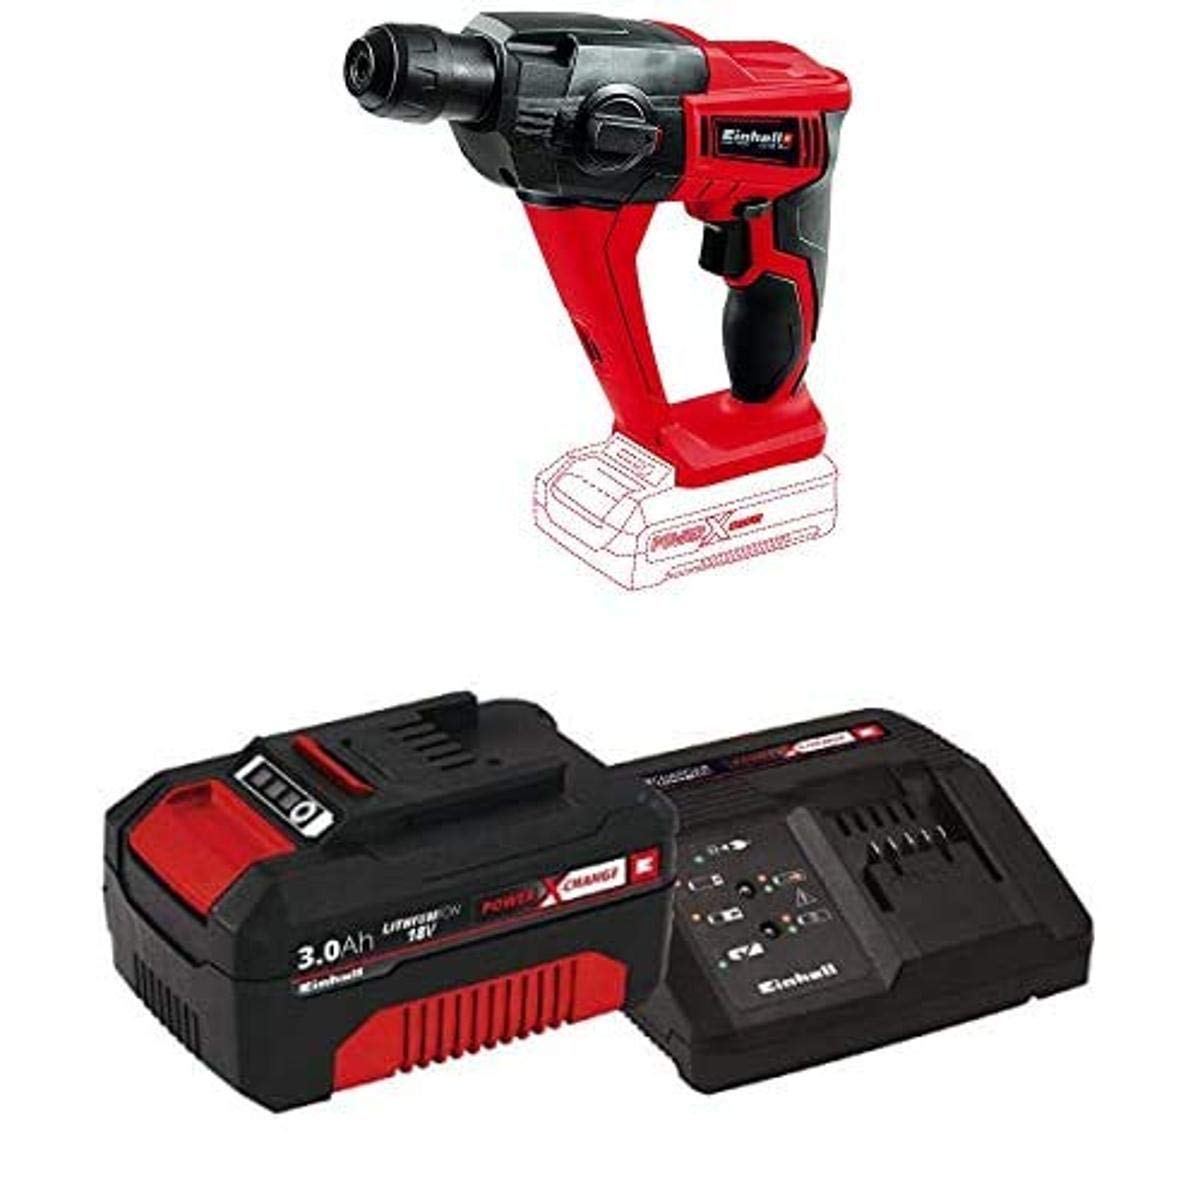 Einhell TE-HD 18 Li Power X-Change 18-Volt Cordless 1/2-Inch, 1100-RPM Rotary Hammer Drill, 1.2J Impact Power, w/SDS-Plus, Chisel Only Mode, Concrete/Stone, Kit (w/ 3.0-Ah Battery and Fast Charger)